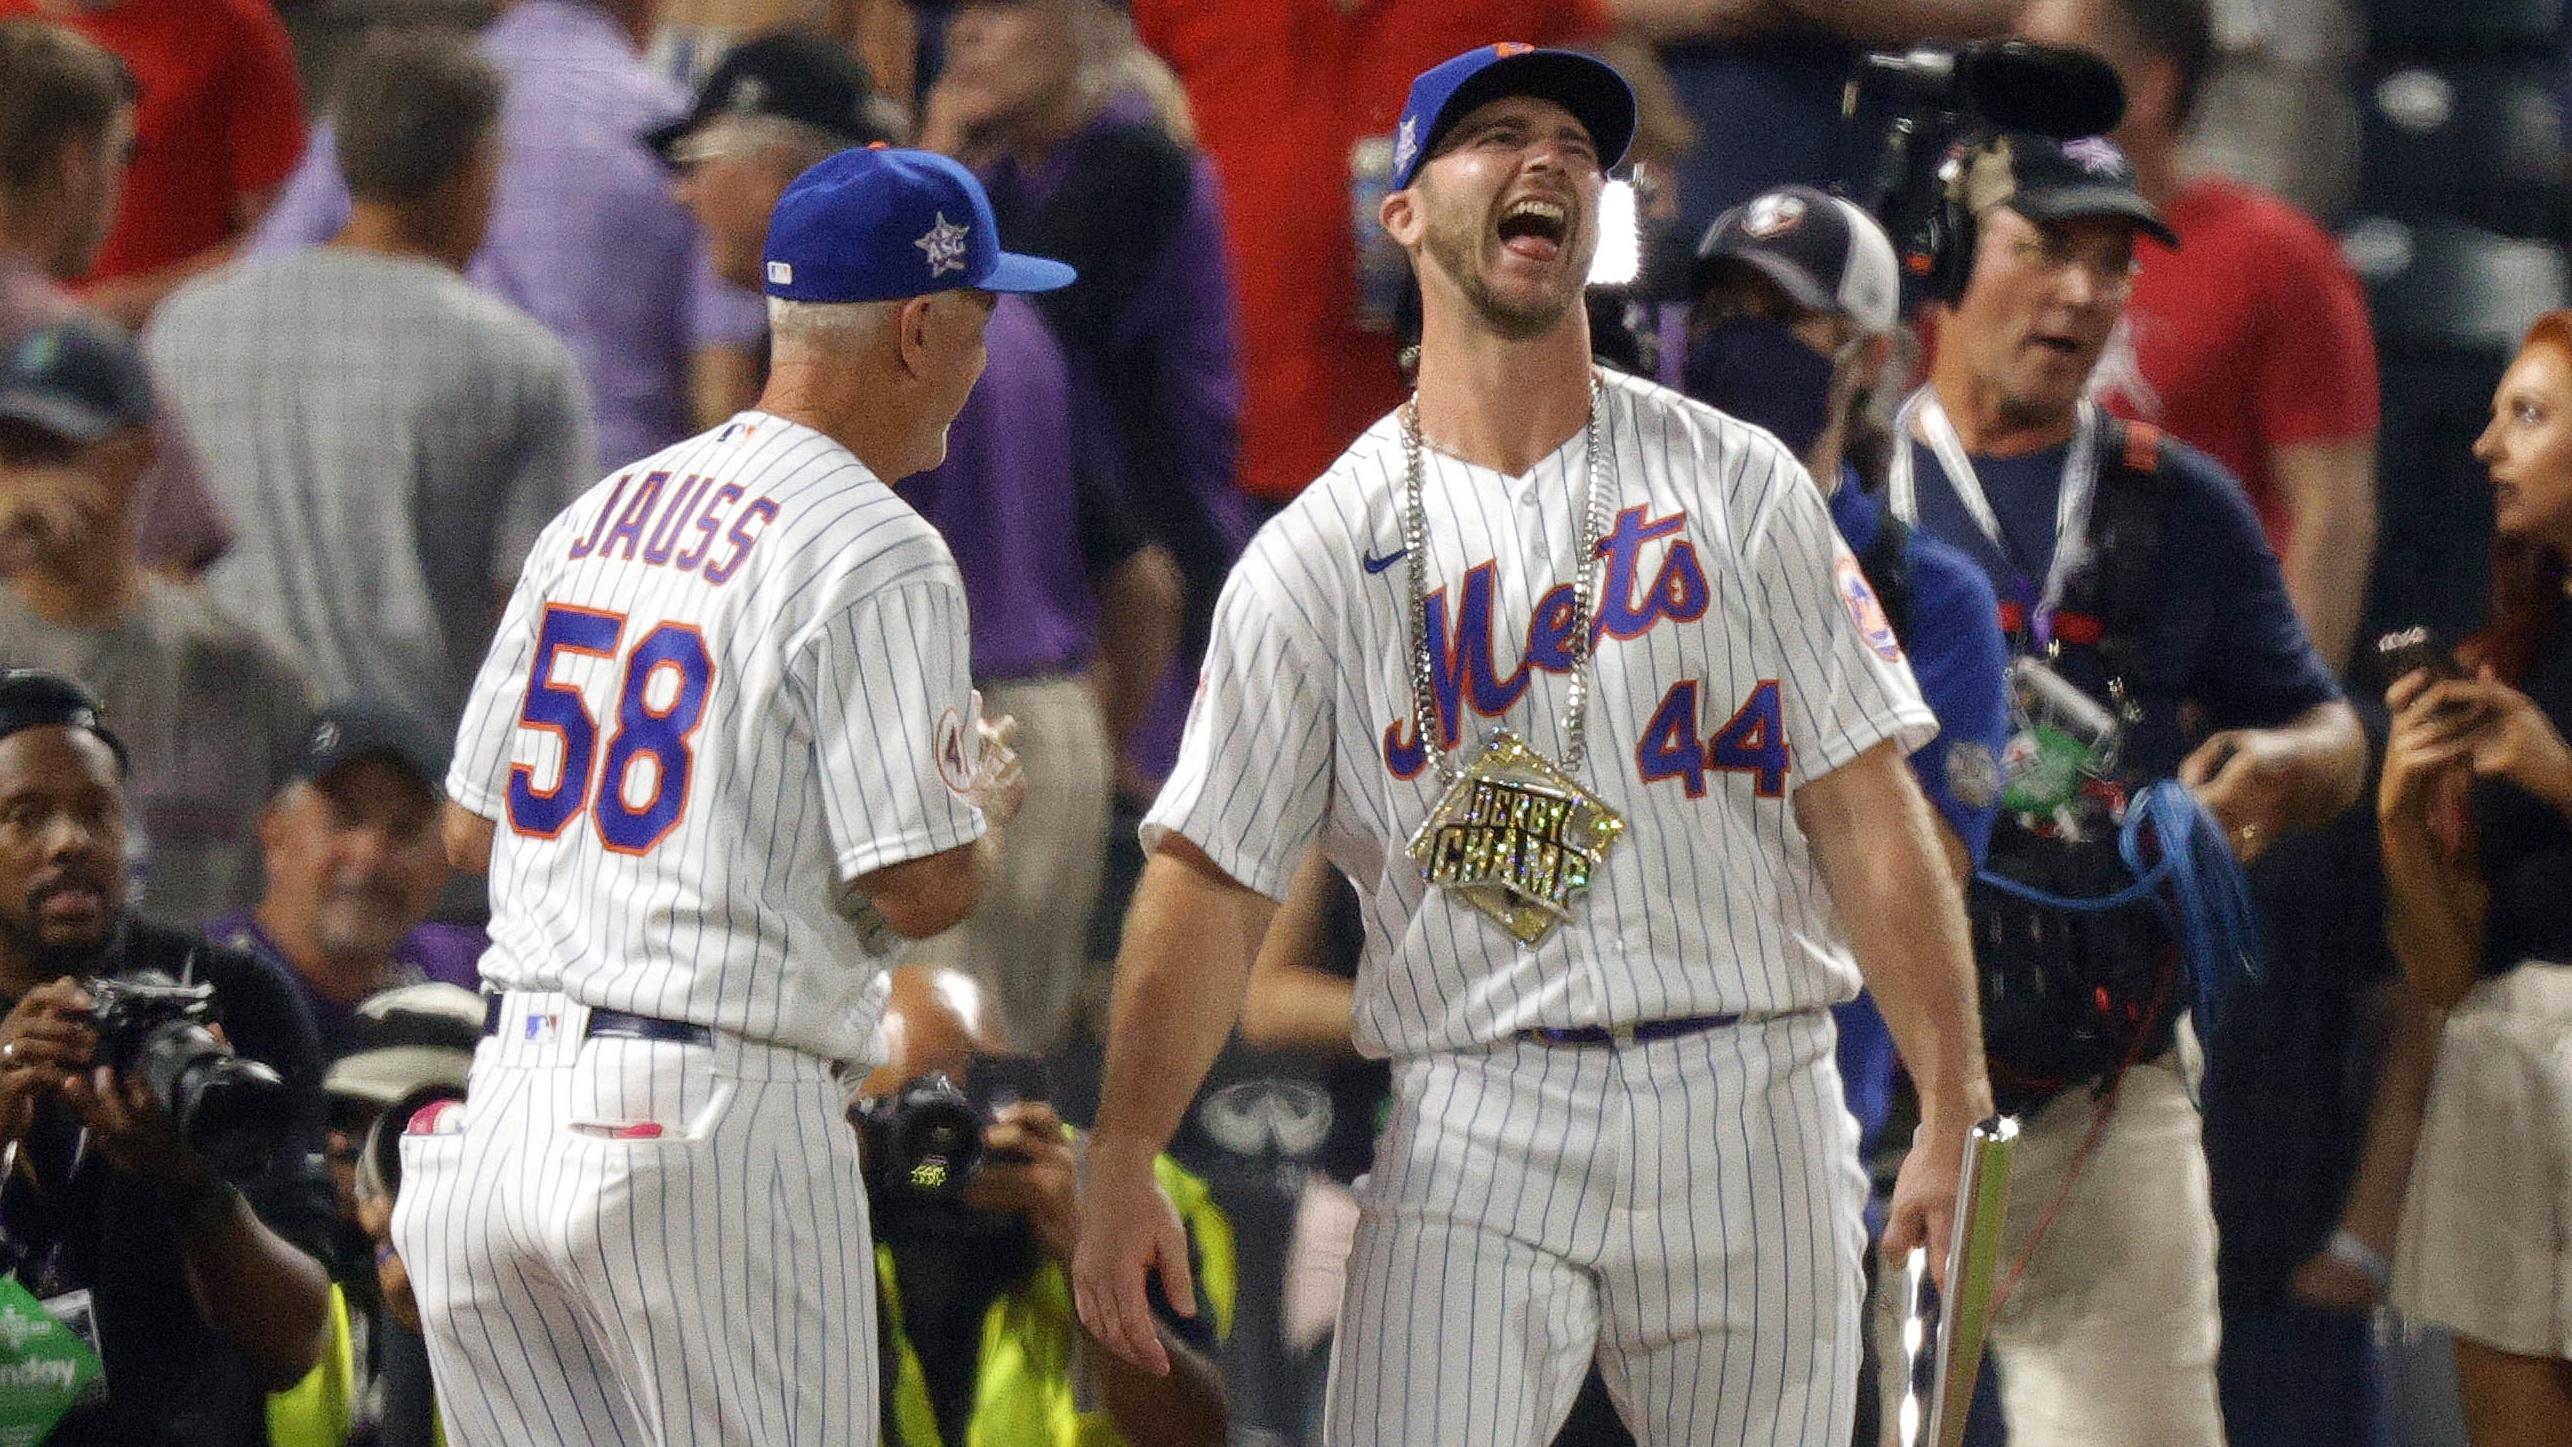 Jul 12, 2021; Denver, CO, USA; New York Mets first baseman Pete Alonso celebrtes with bench coach Dave Jauss following his victory against Baltimore Orioles first baseman Trey Mancini in the 2021 MLB Home Run Derby. / © Isaiah J. Downing-USA TODAY Sports